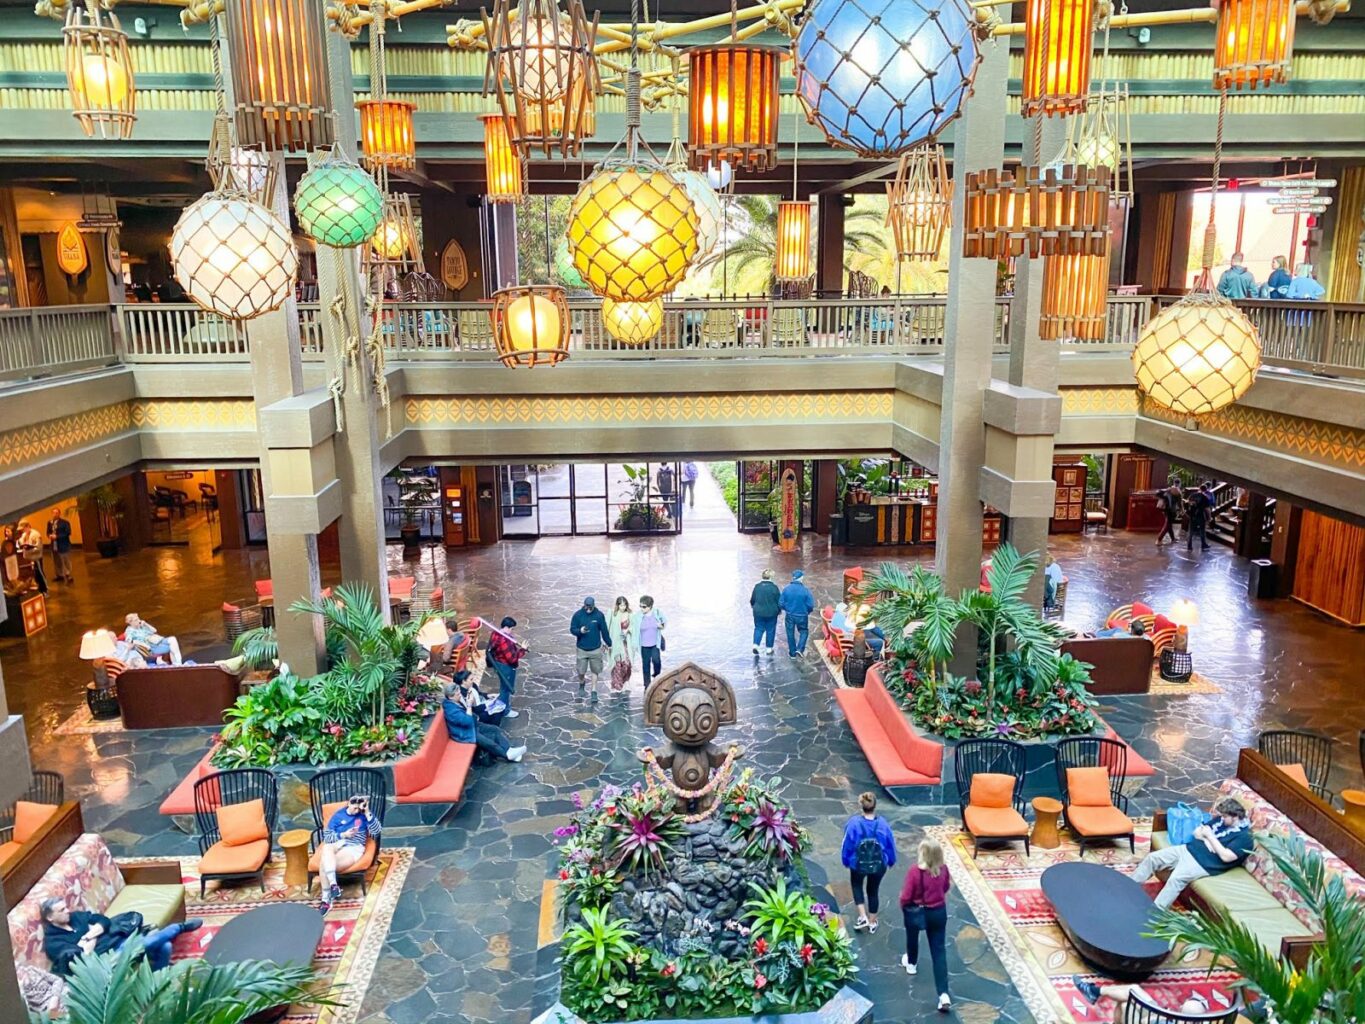 people walking around Polynesian themed lobby with statue and plants